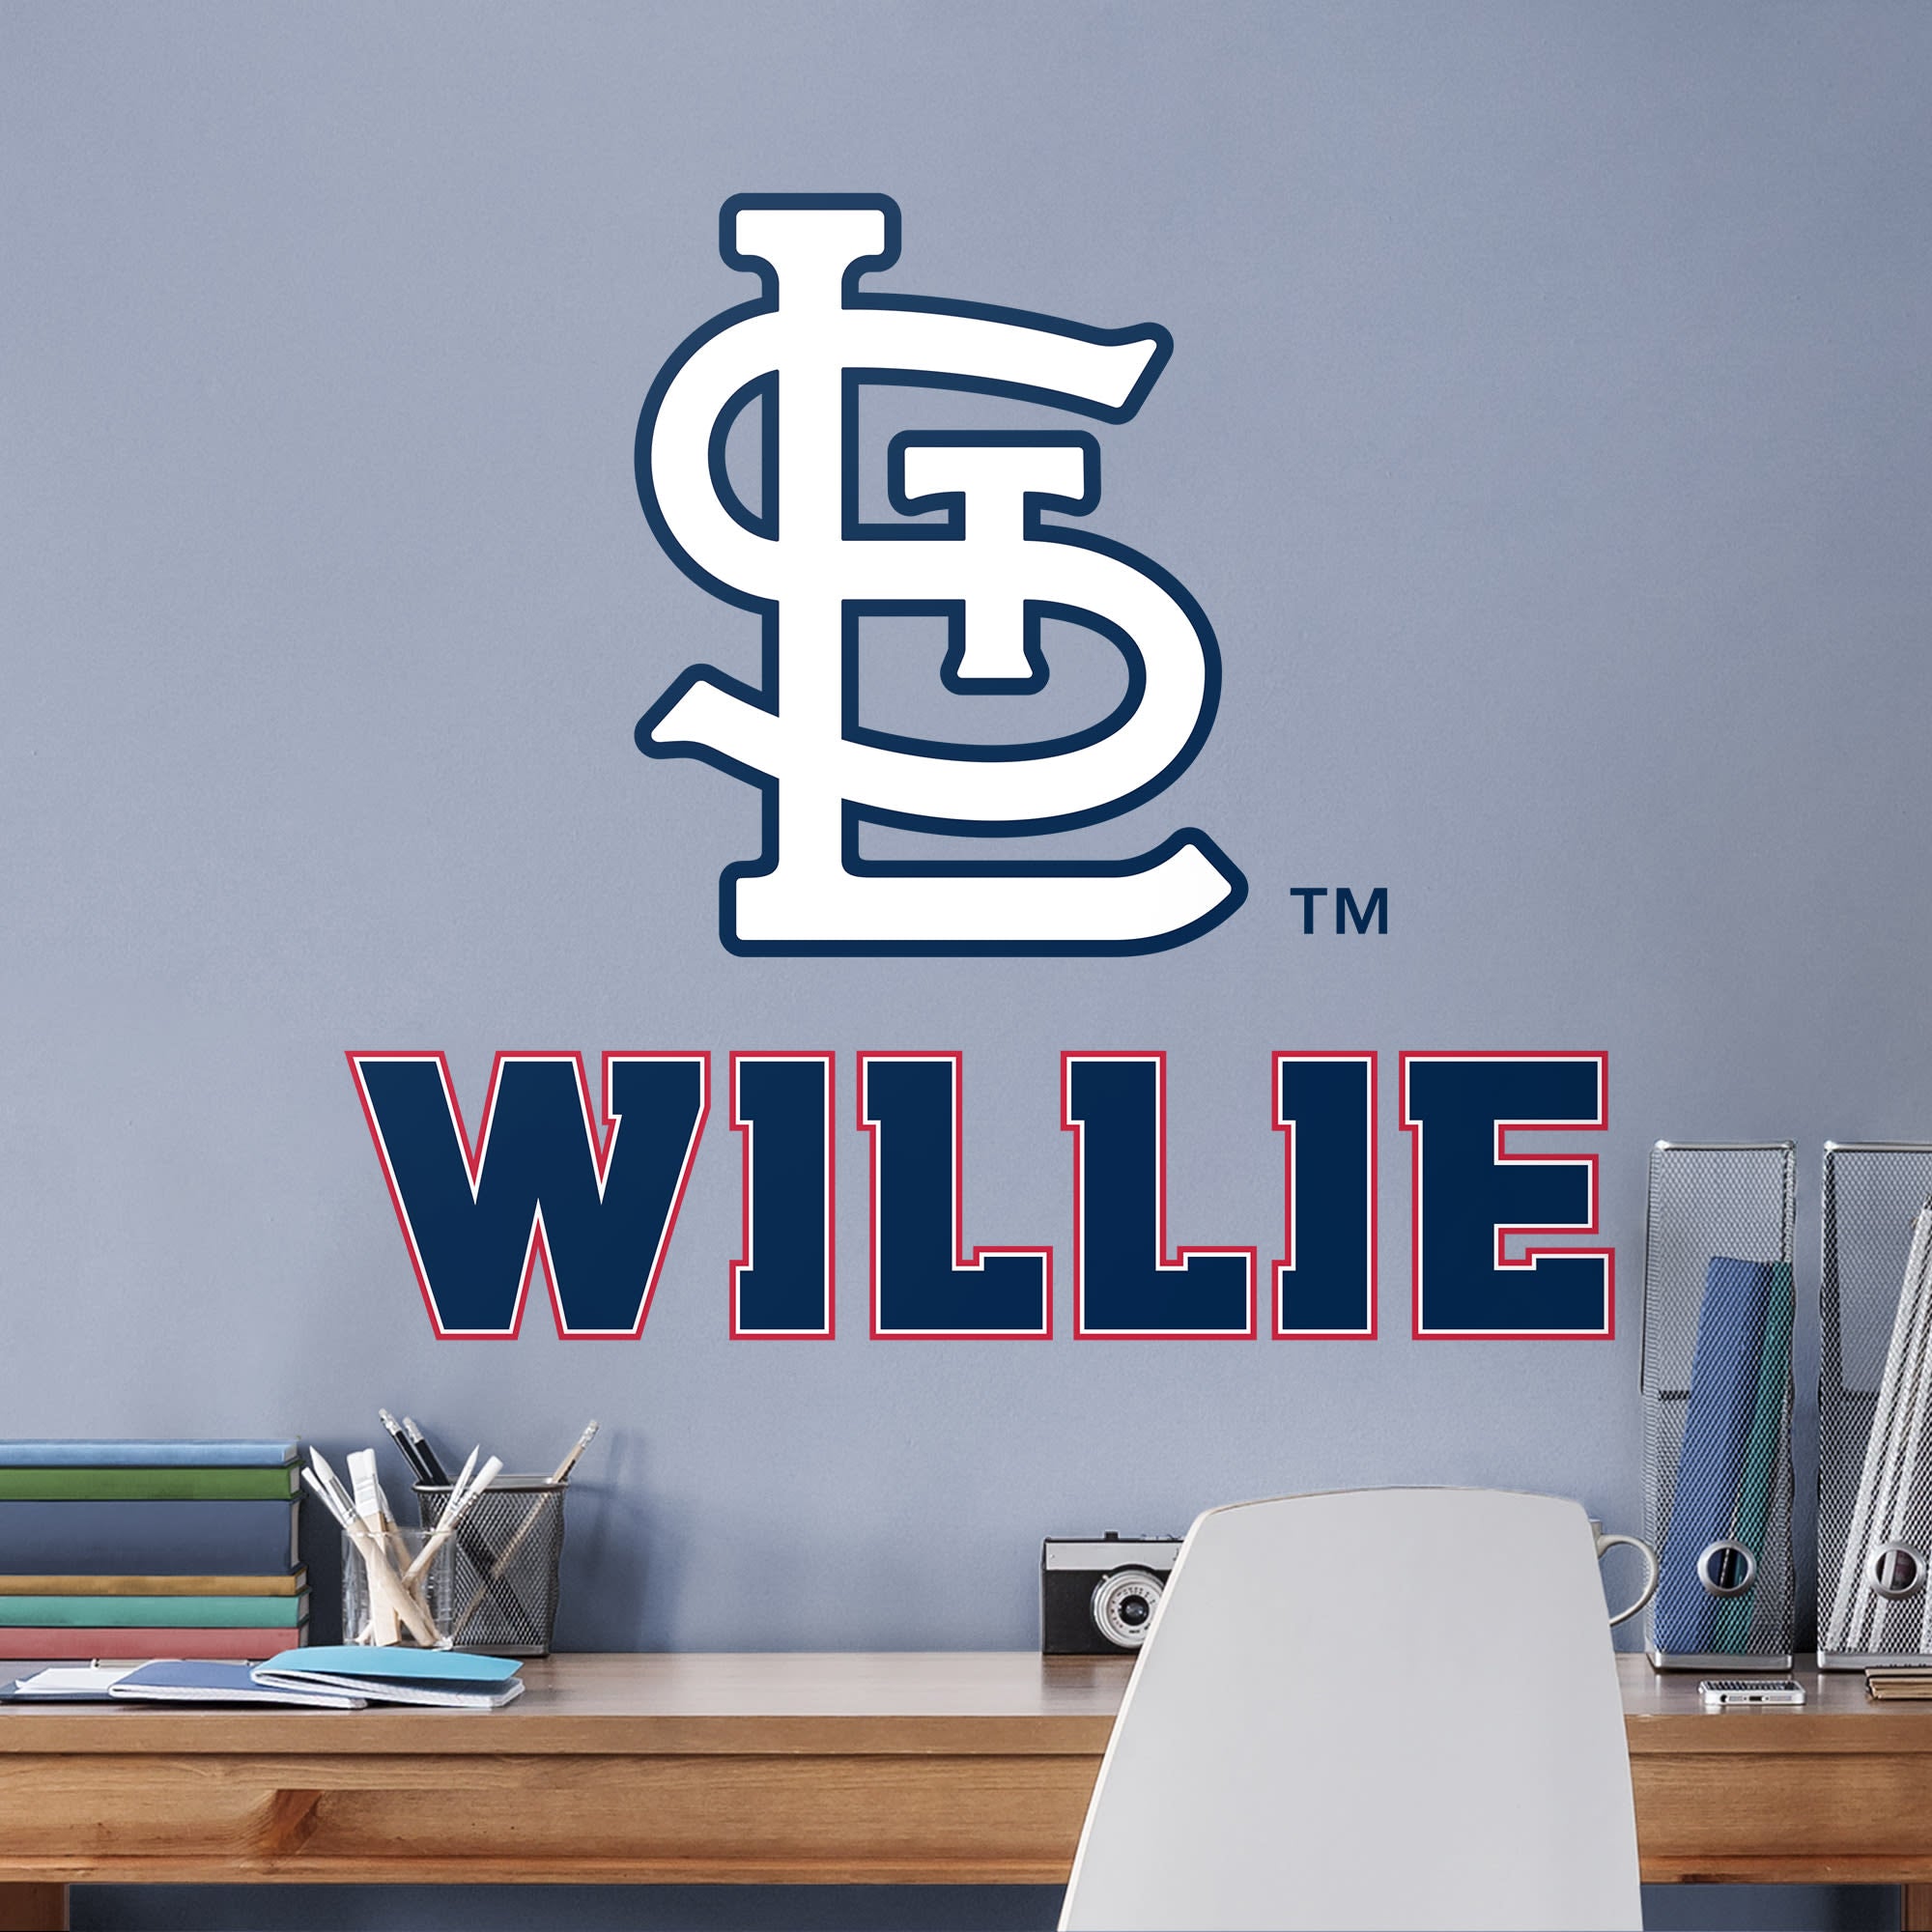 St. Louis Cardinals: "STL" Stacked Personalized Name - Officially Licensed MLB Transfer Decal in Navy (52"W x 39.5"H) by Fathead